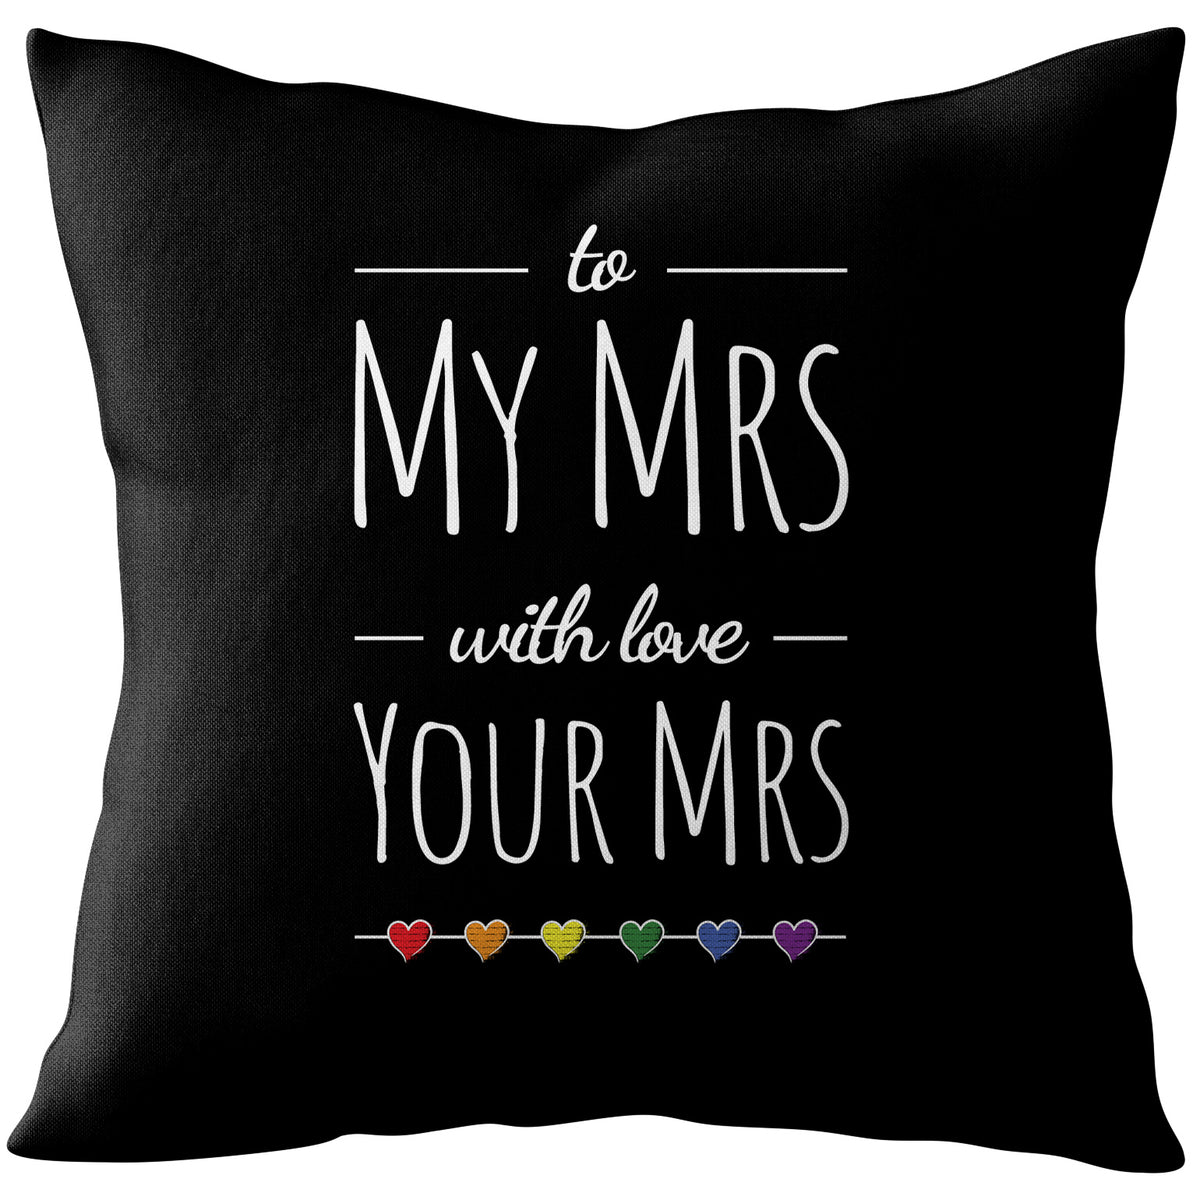 To My Mrs, With Love Your Mrs - Lesbian Gay Couple Cushion | Gift